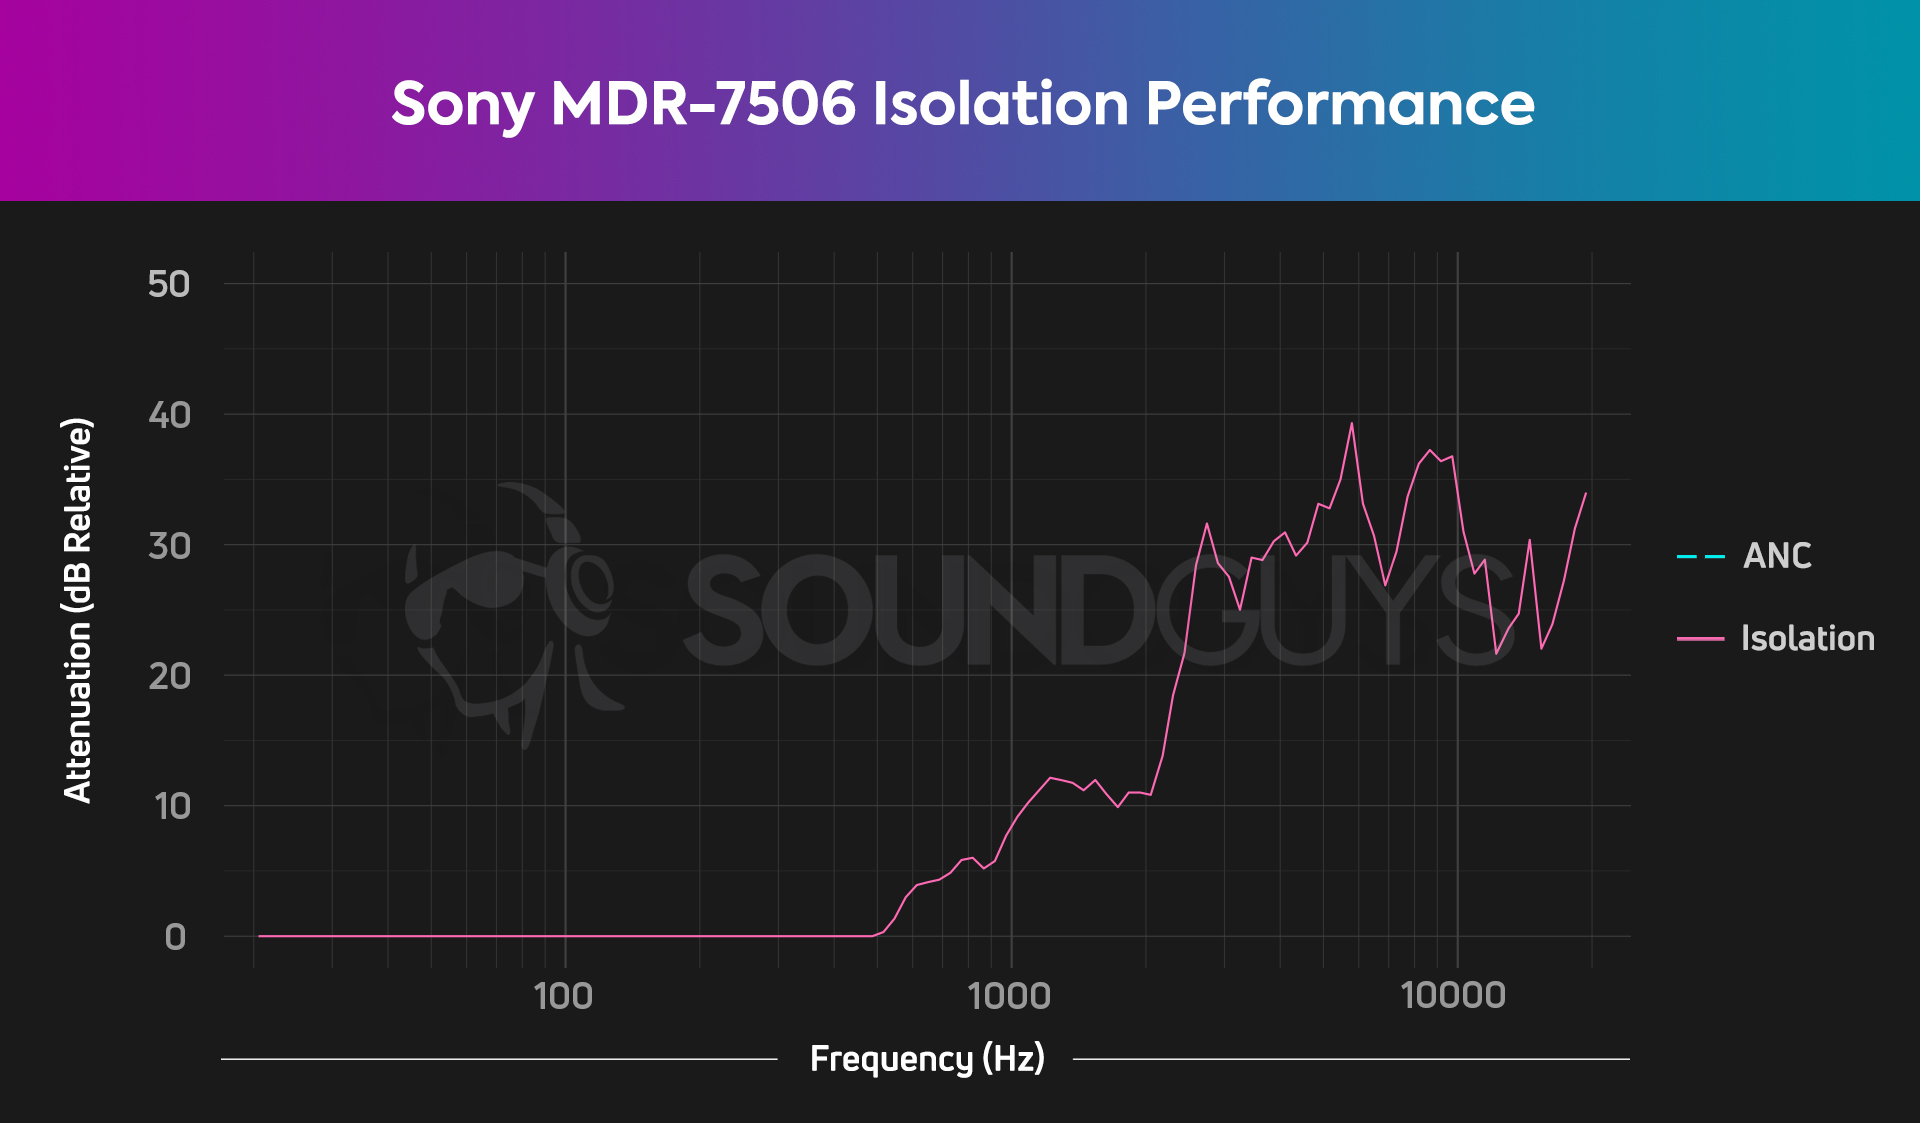 This chart shows the noise attenuation of the Sony MDR-7506, and how it mainly isolates high frequencies.